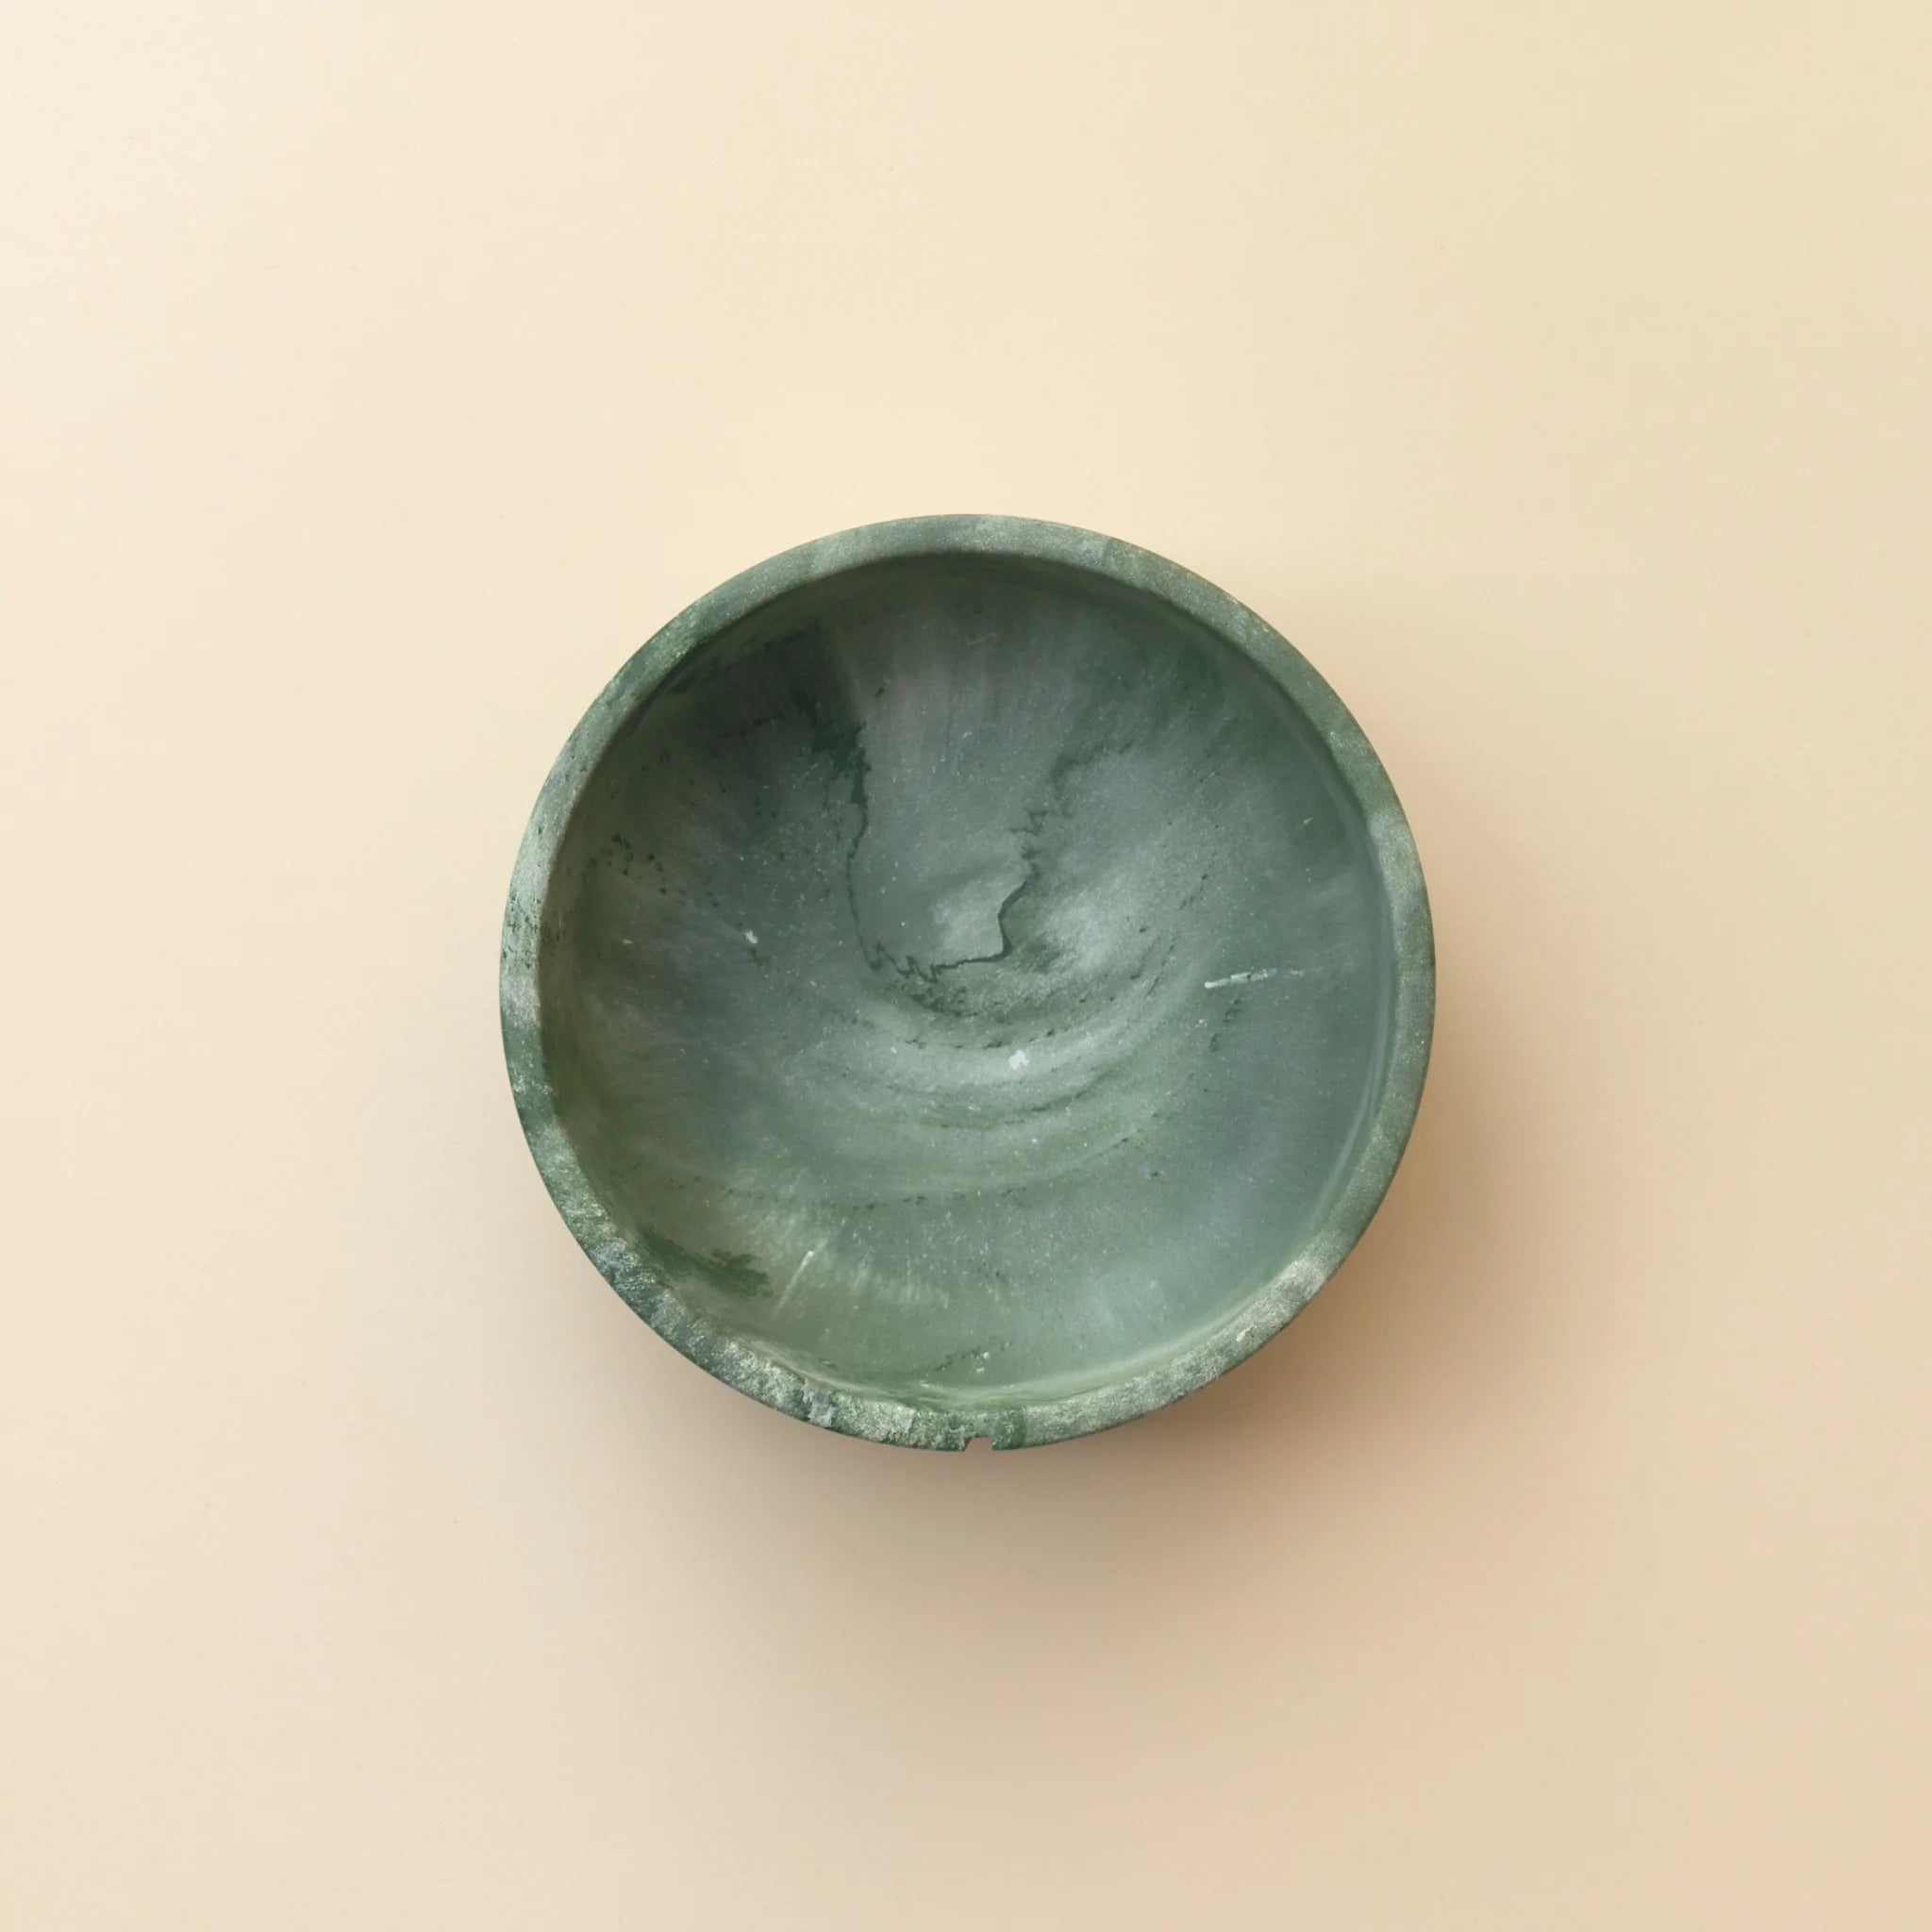 Classic Feeder Bowl - Duck Green Marble